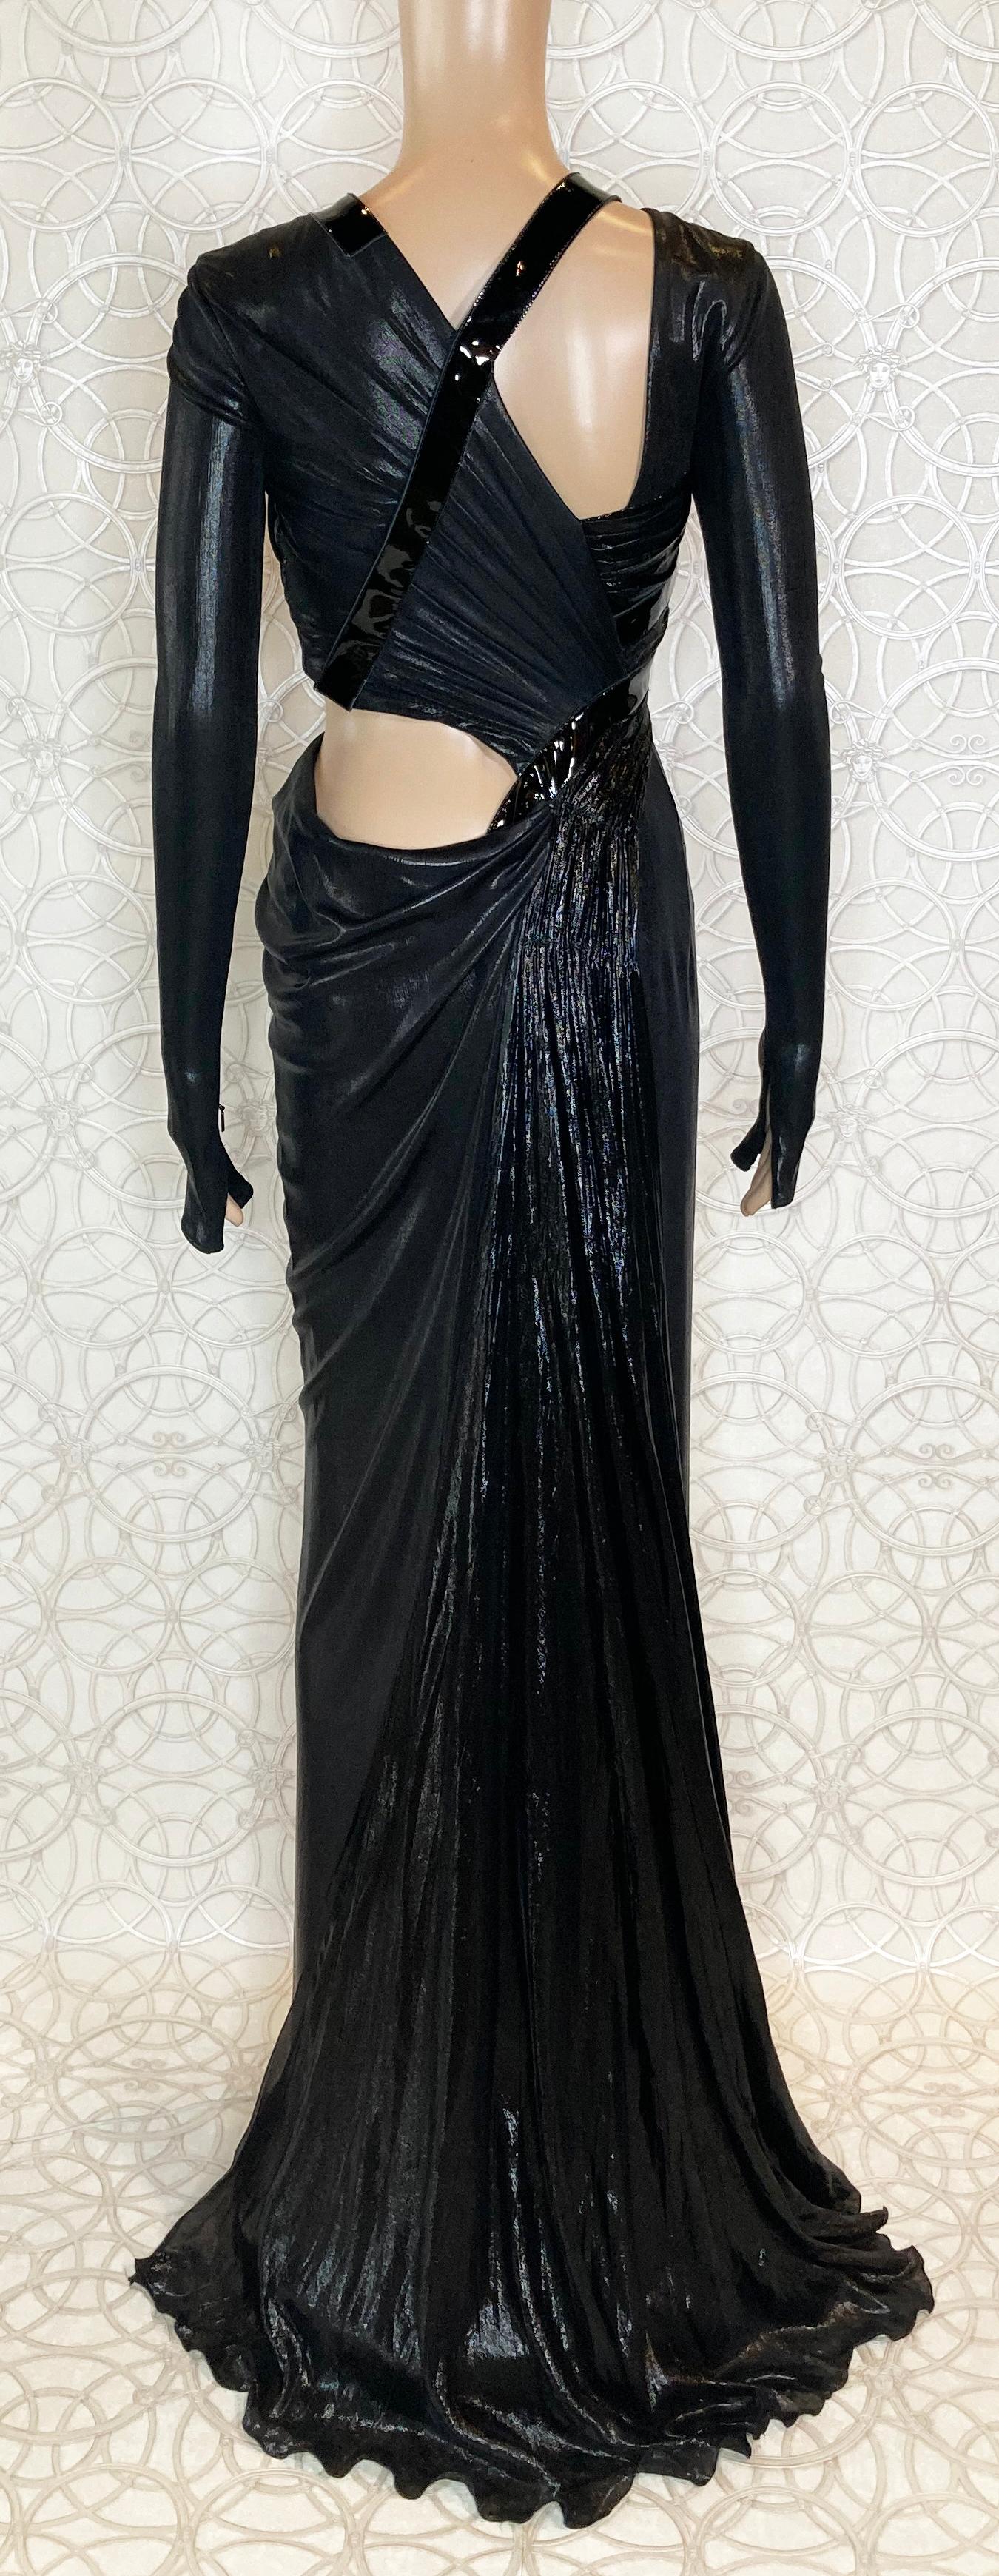 New VERSACE Hottest Black Liquid Jersey Gown With Vinyl Sleeves 5